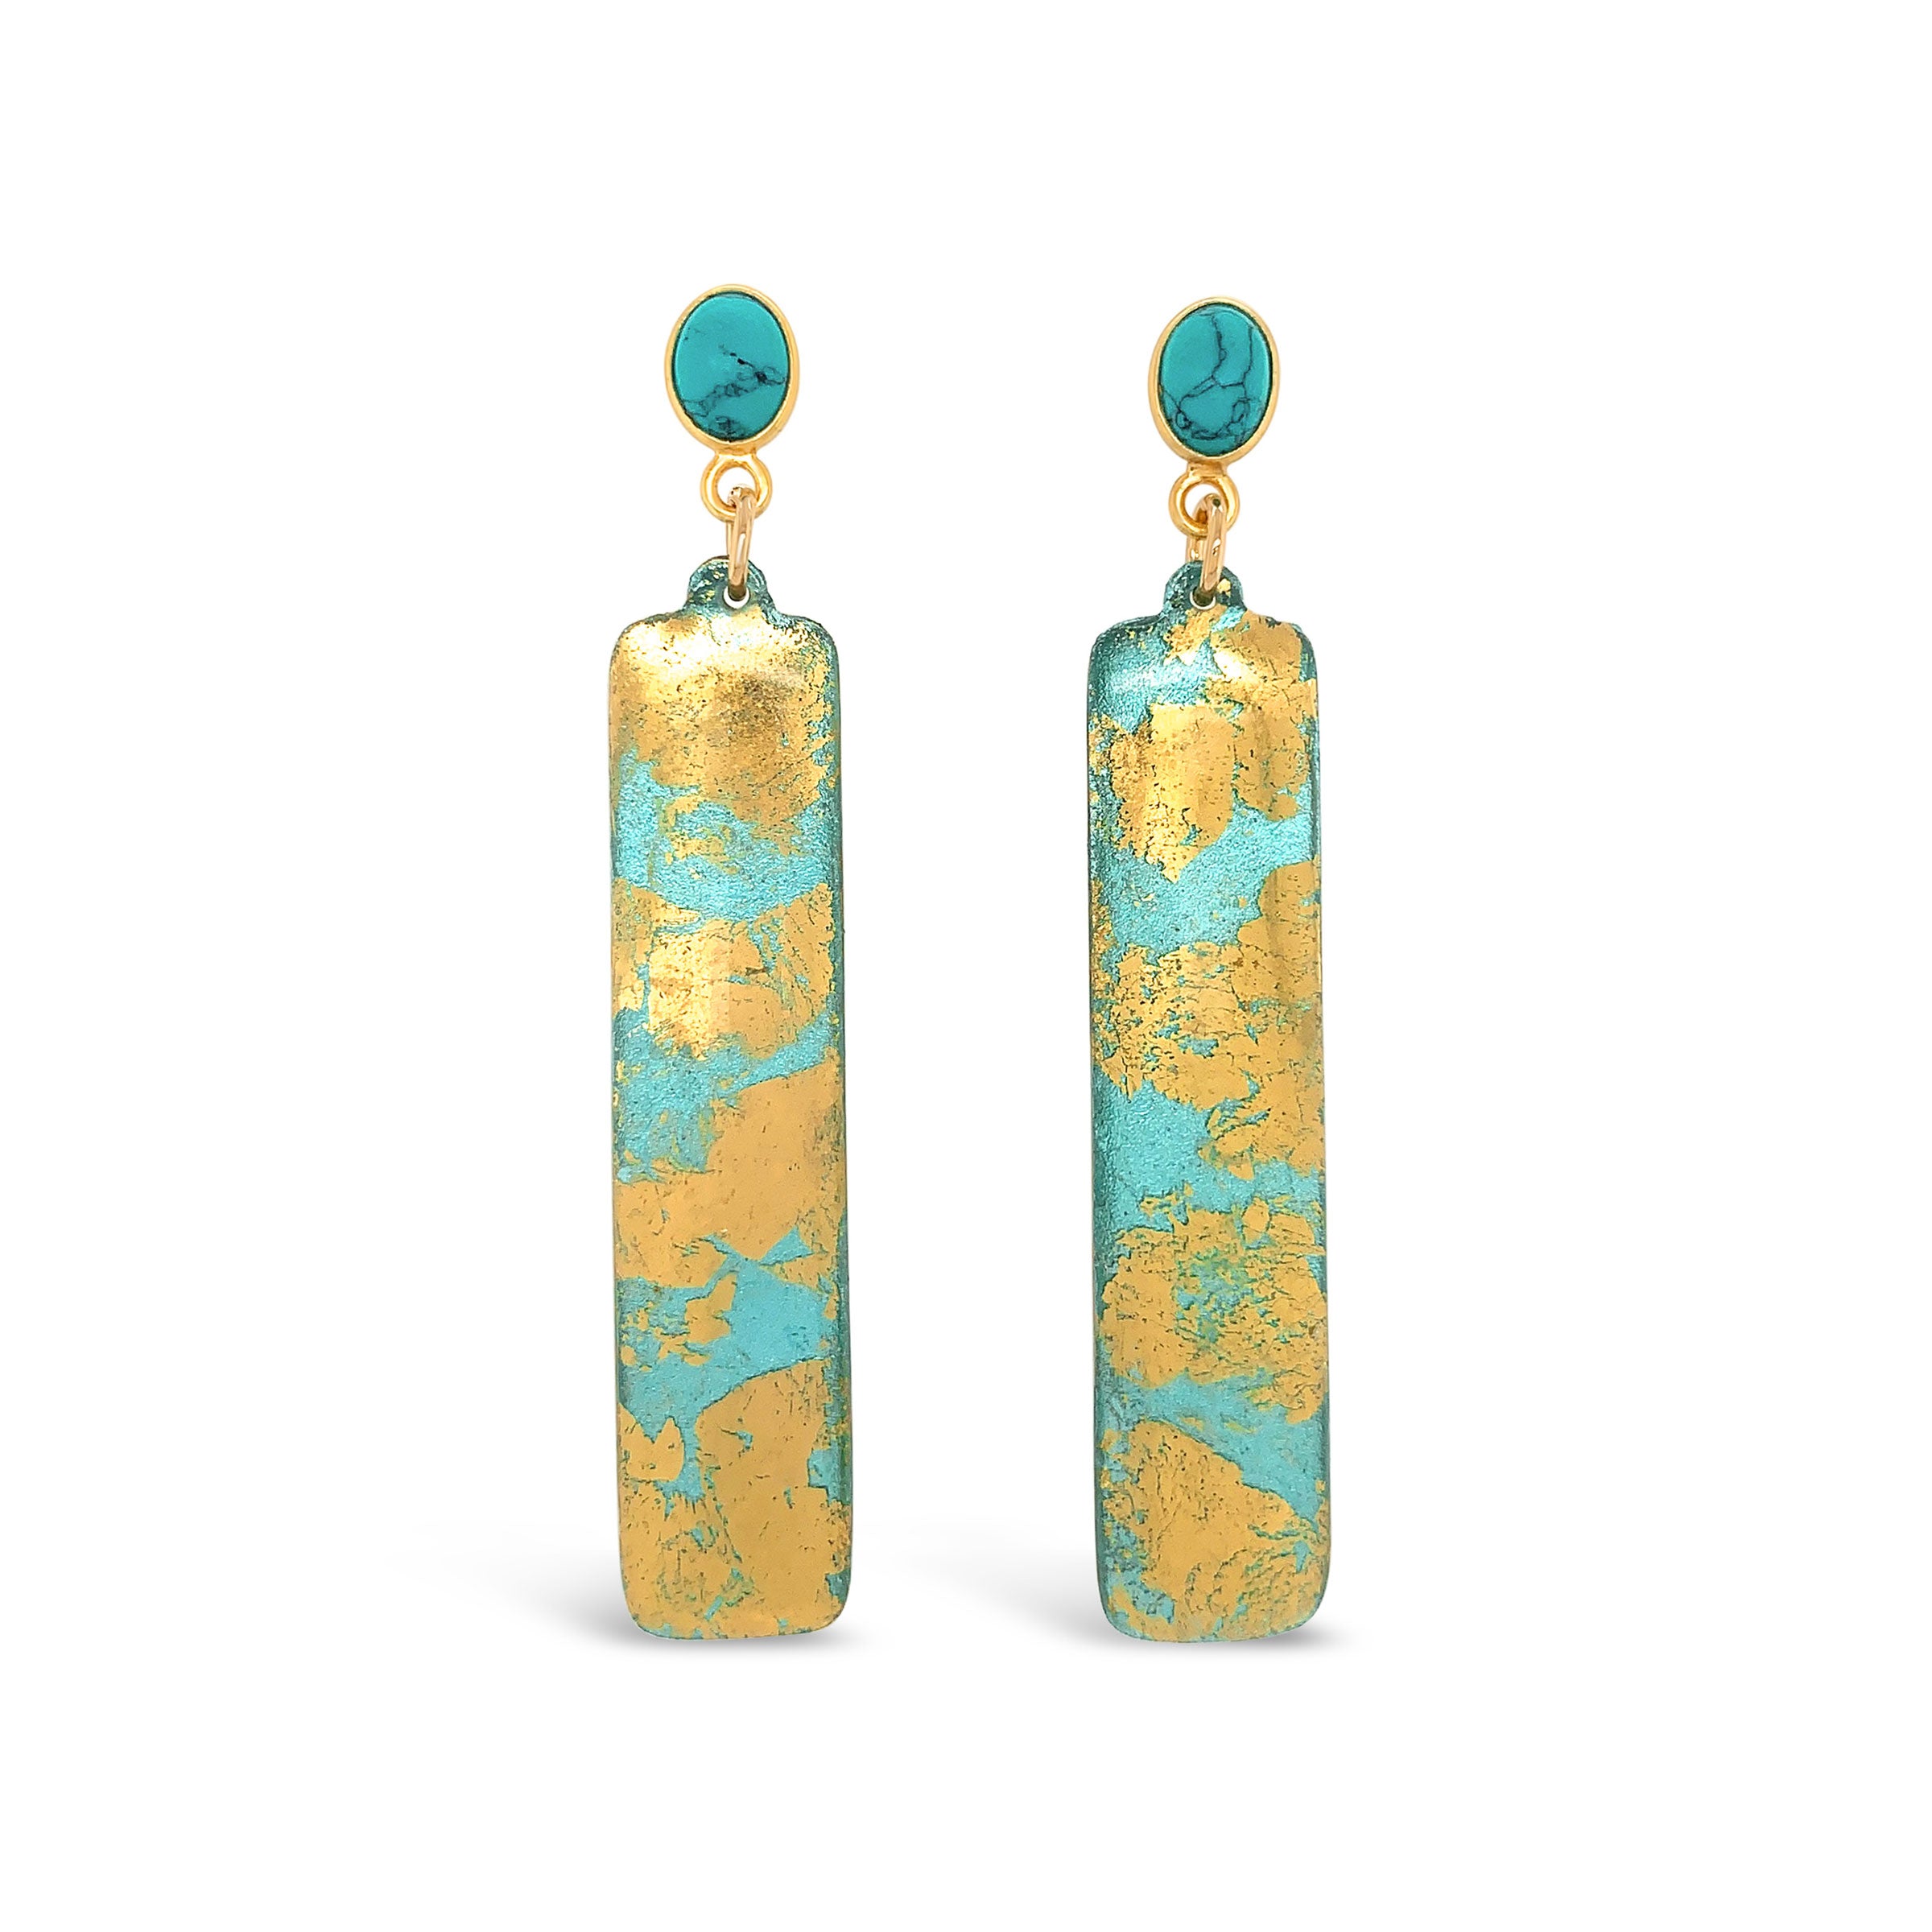 Copper Leather Leaf Earrings with Kingman Turquoise Accents - Beadmask